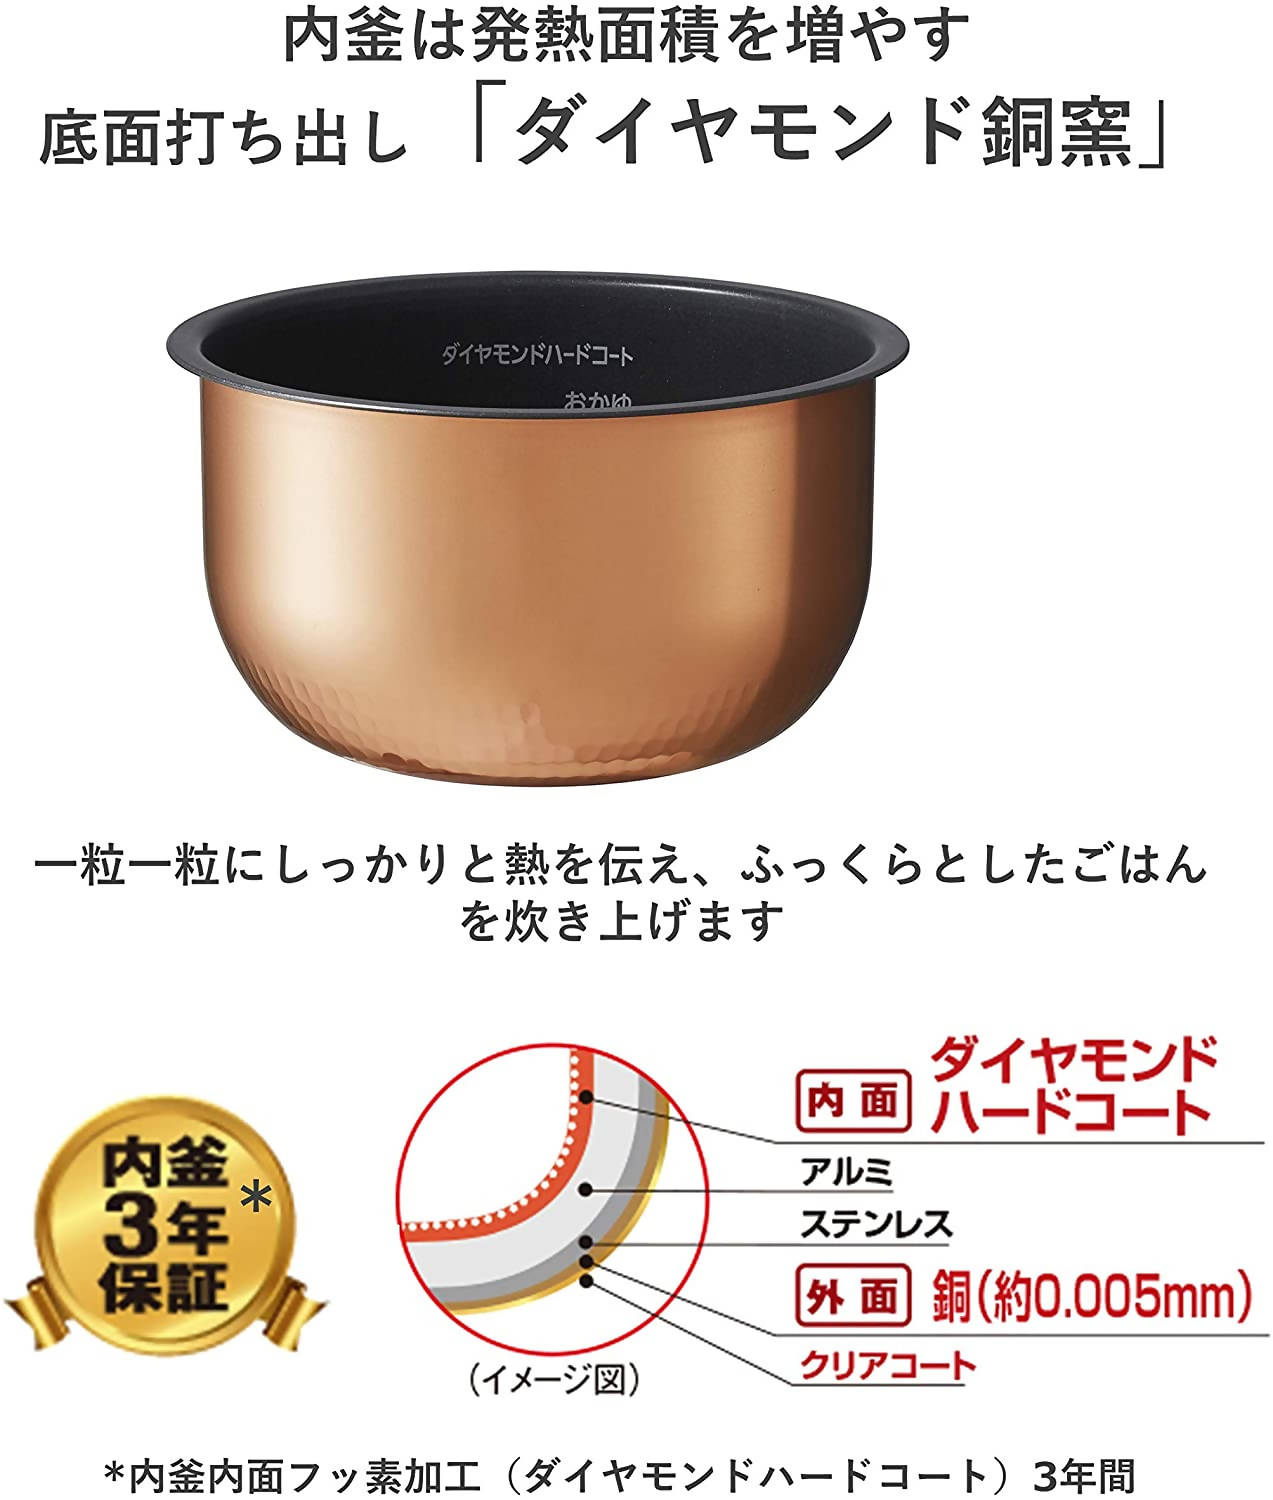 Panasonic SR-FD109-T 2-Stage IH (Induction Heating) Rice Cooker – 5.5 Go  Capacity – Brown